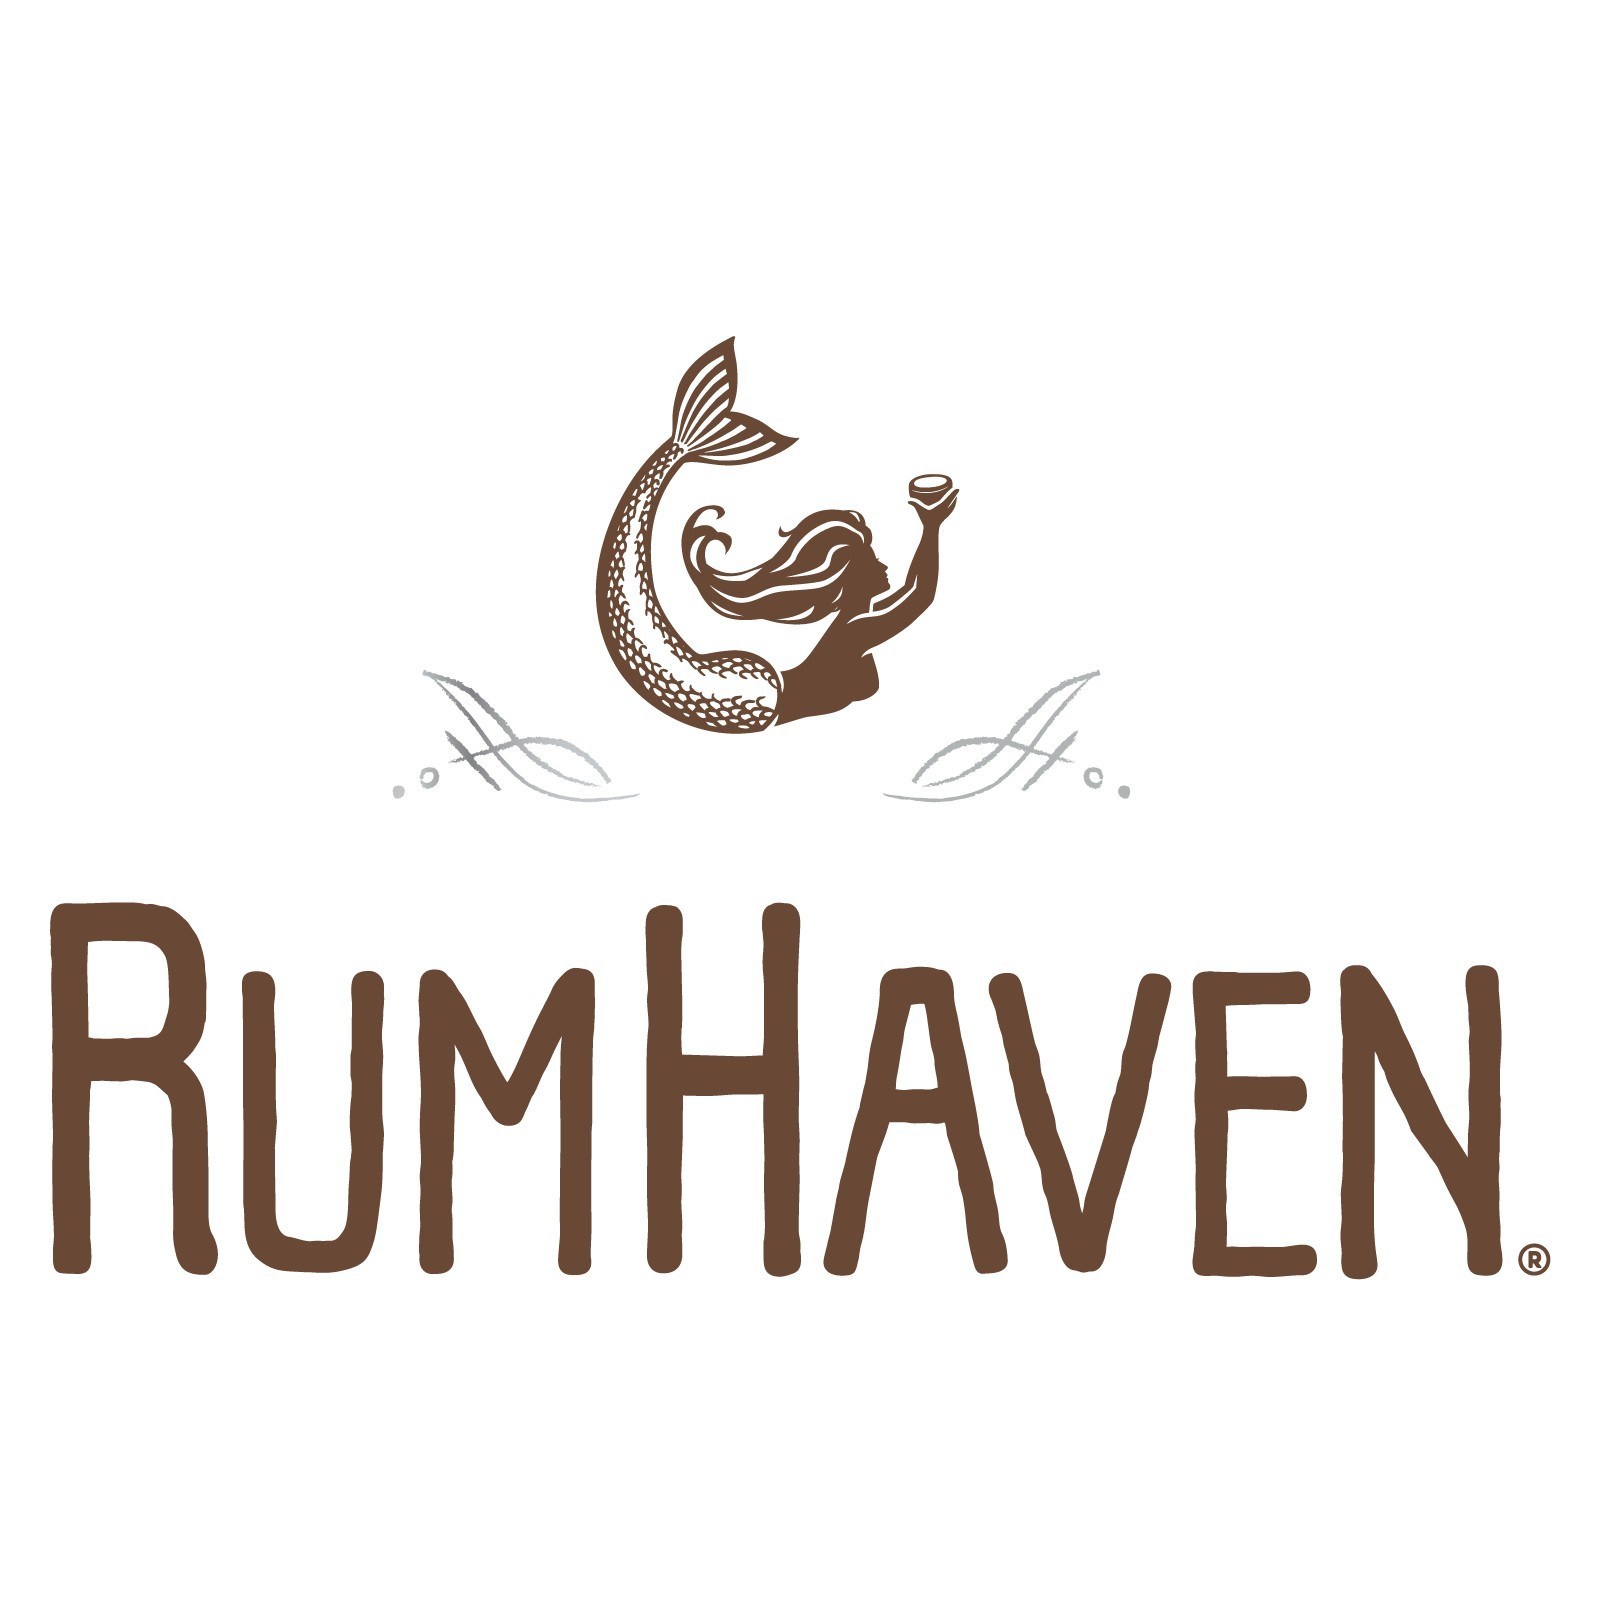 RumHaven is an uncomplicated spirit made with premium Caribbean rum, real coconut water and pure cane sugar offering a clean and refreshing taste without artificial flavors or preservatives, bottled at 42 proof. (PRNewsfoto/RumHaven)